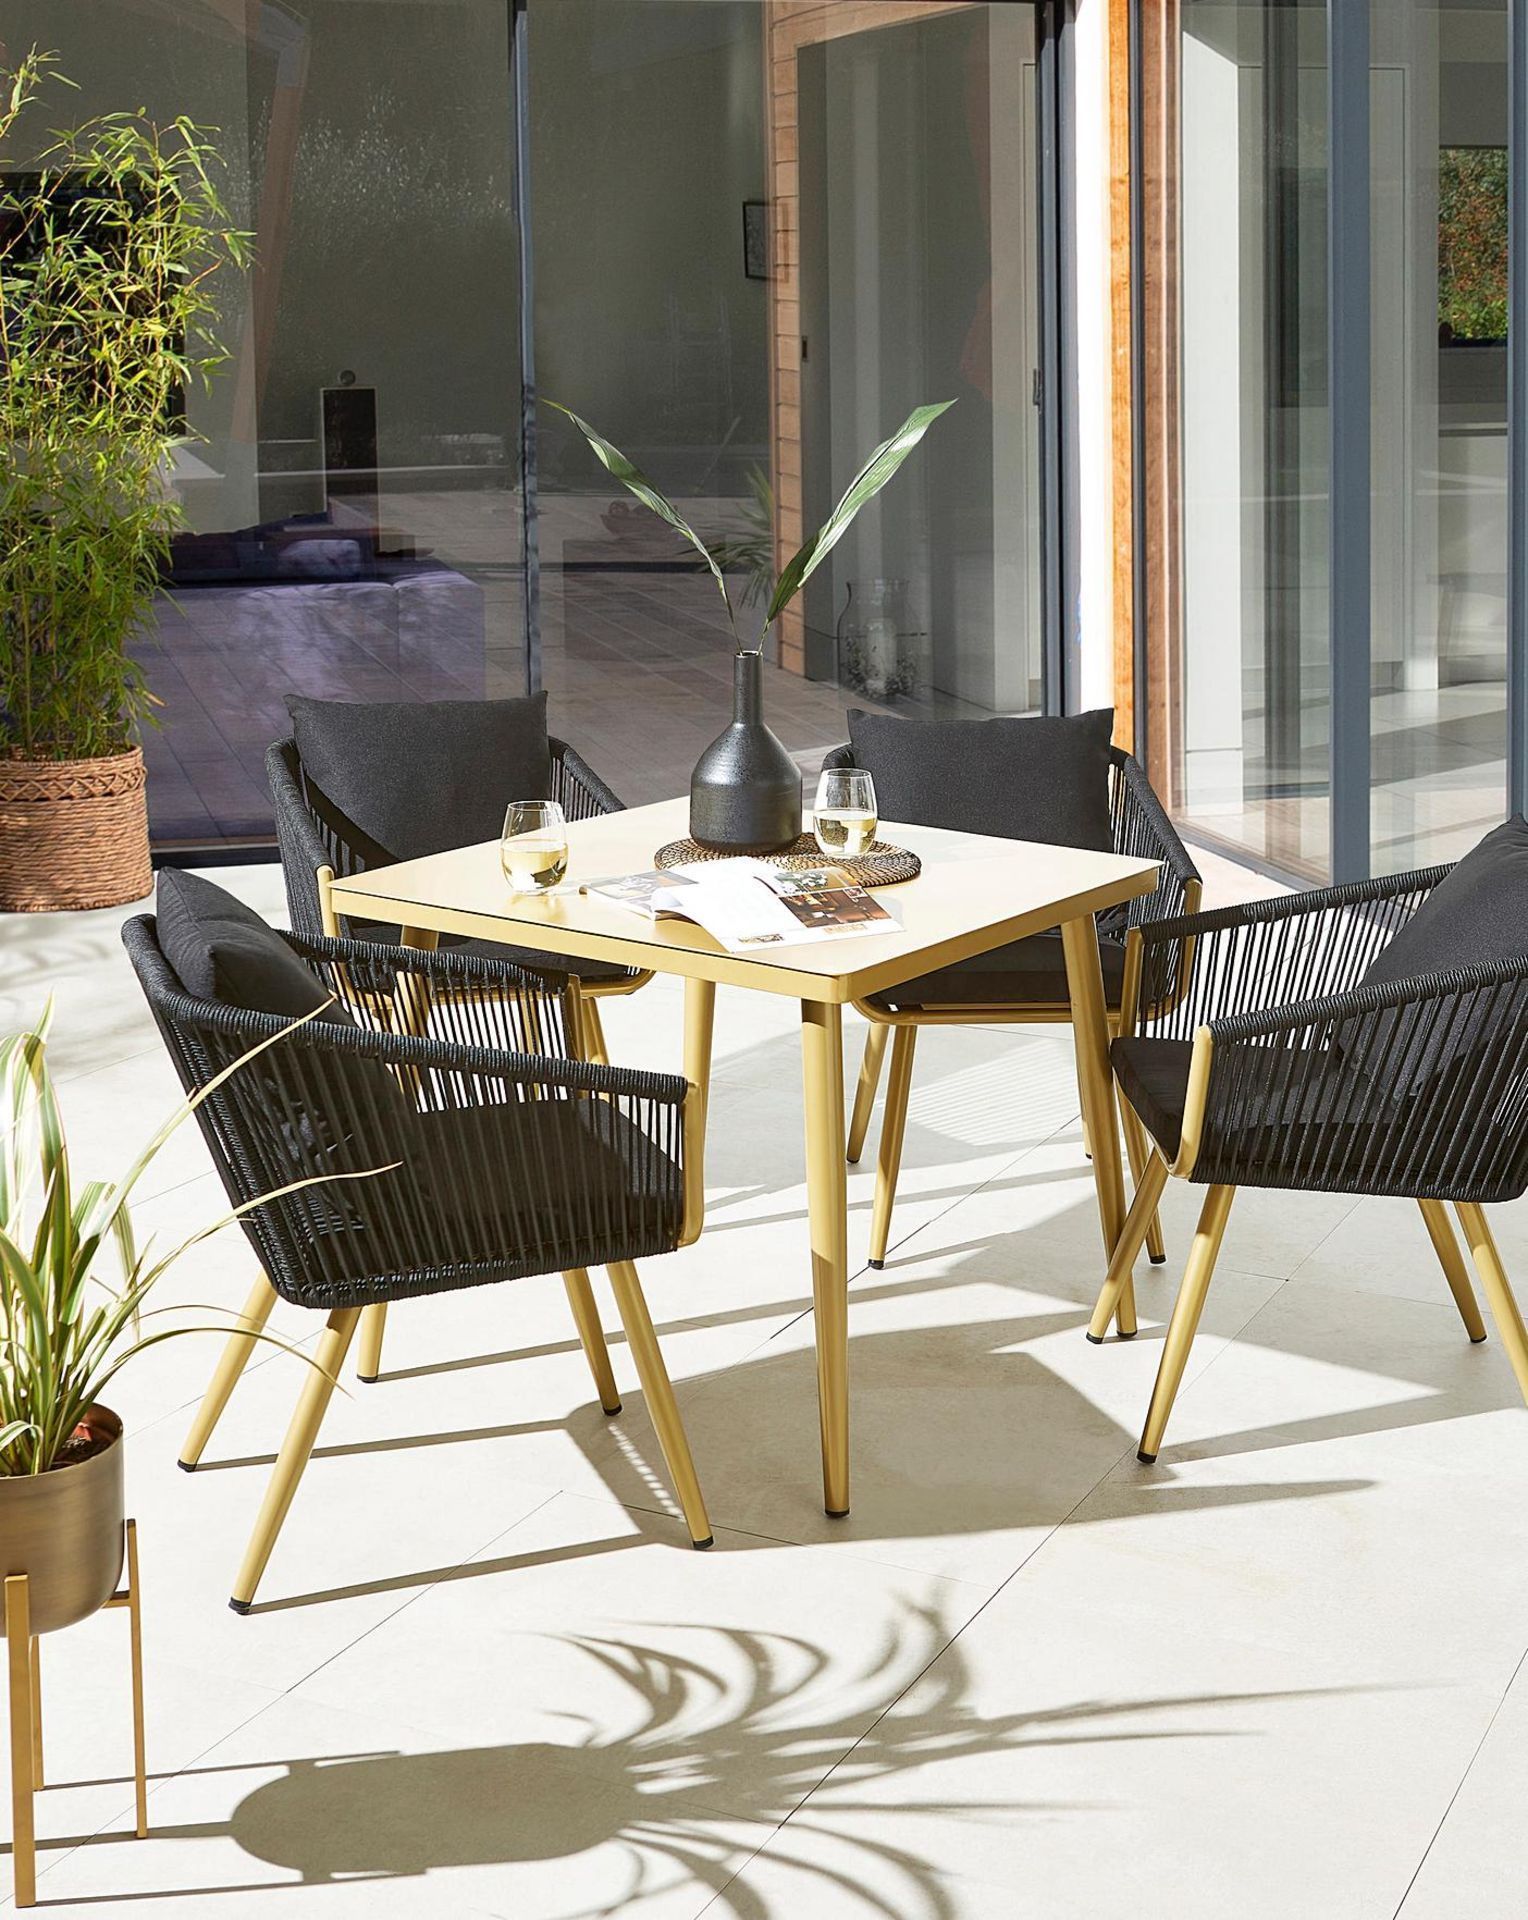 Trade Lot 4 x New & Packaged Joanna Hope Naya 4 Seater Dining Sets. RRP £719 each. This Exclusive - Image 3 of 11